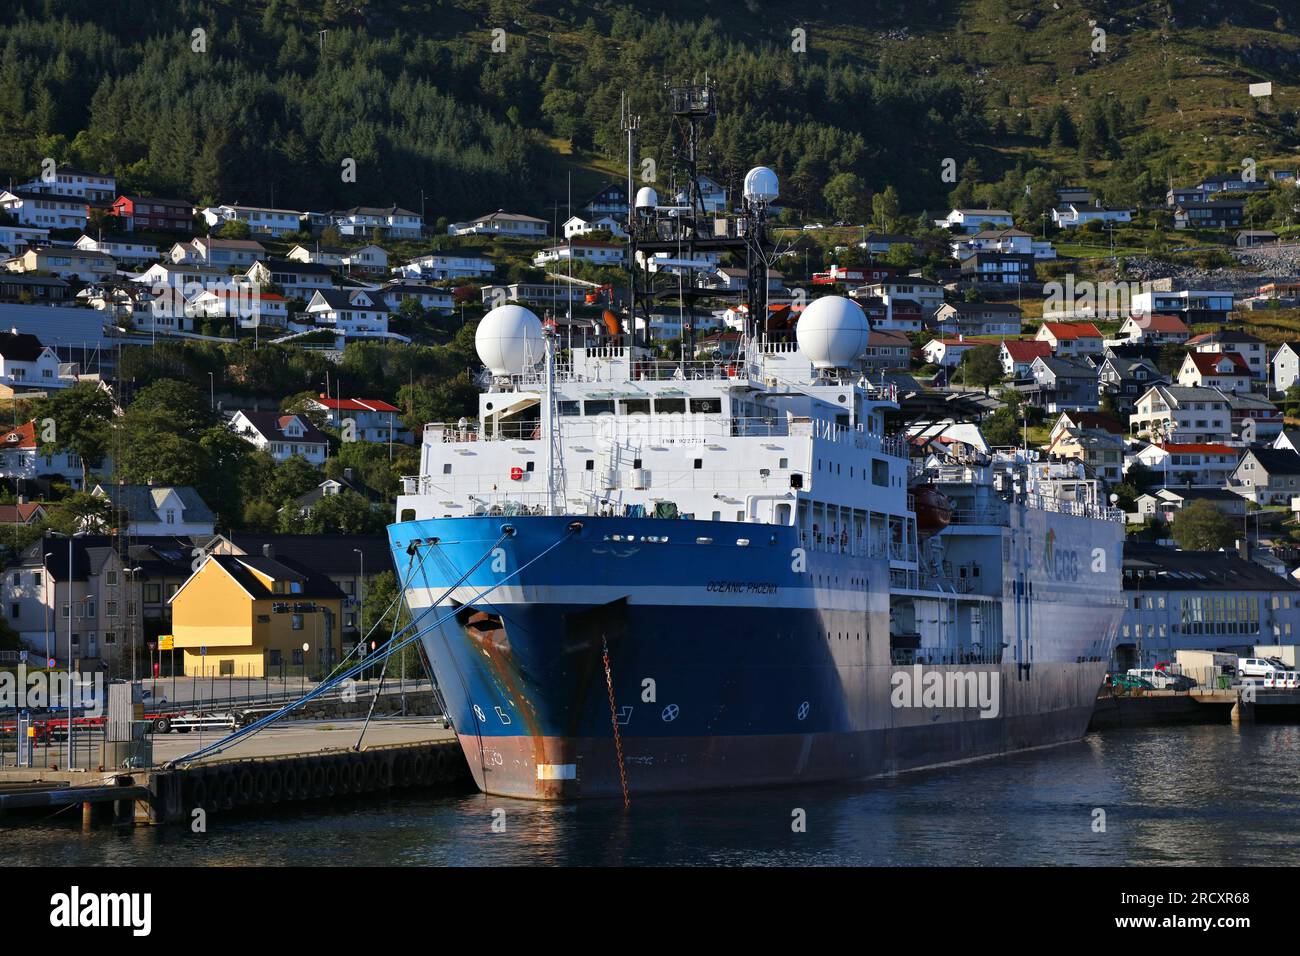 MALOY, NORWAY - JULY 25, 2020: Oceanic Phoenix cable laying ship converted to research vessel moored at Maloy harbor in Norway. Stock Photo